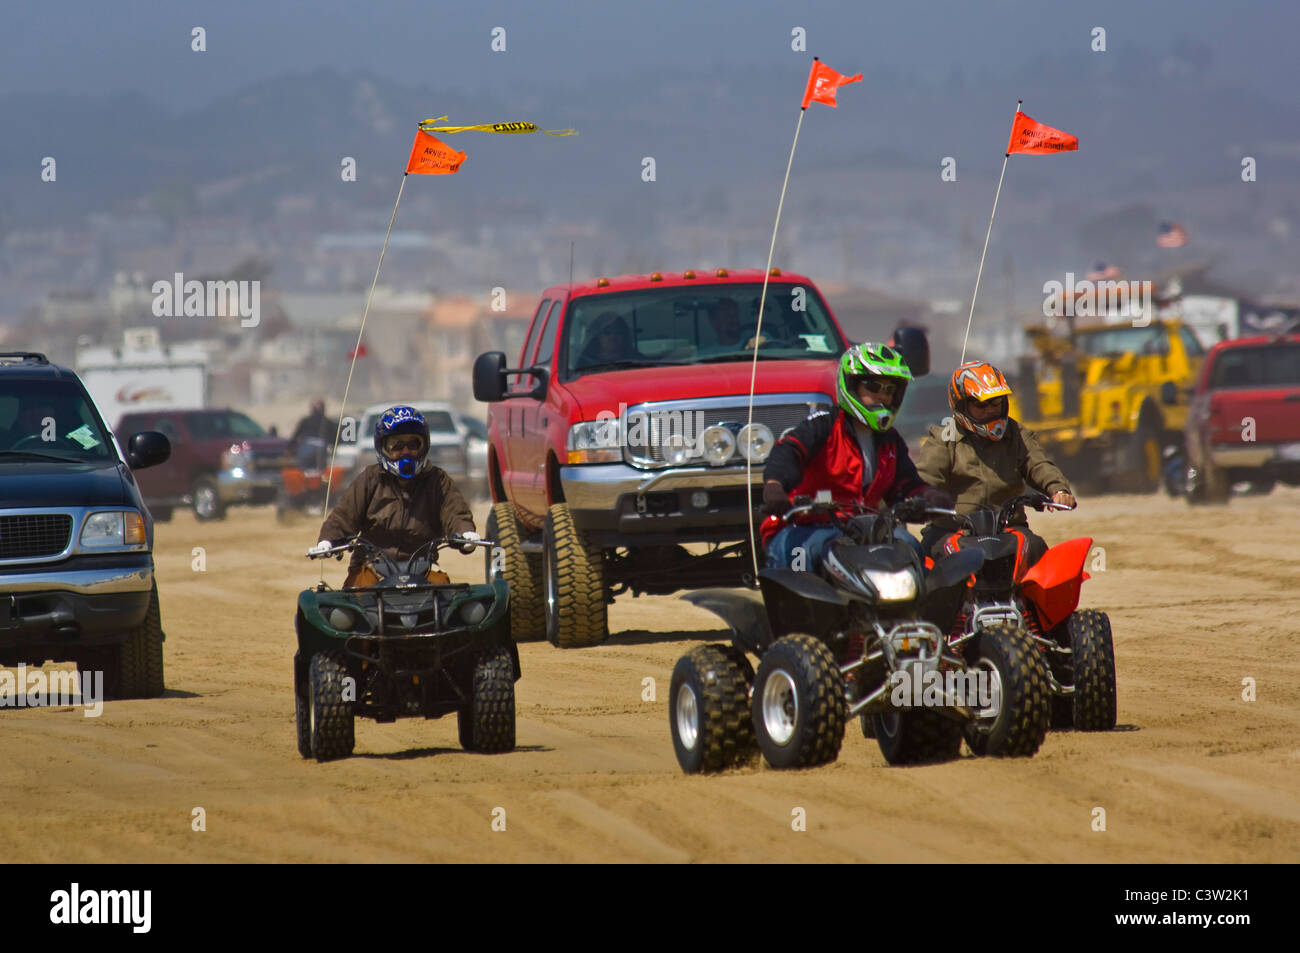 ATV's and passenger vehicles driving on the sand at Oceano Dunes State Vehicular Recreation Area, Oceano, California Stock Photo